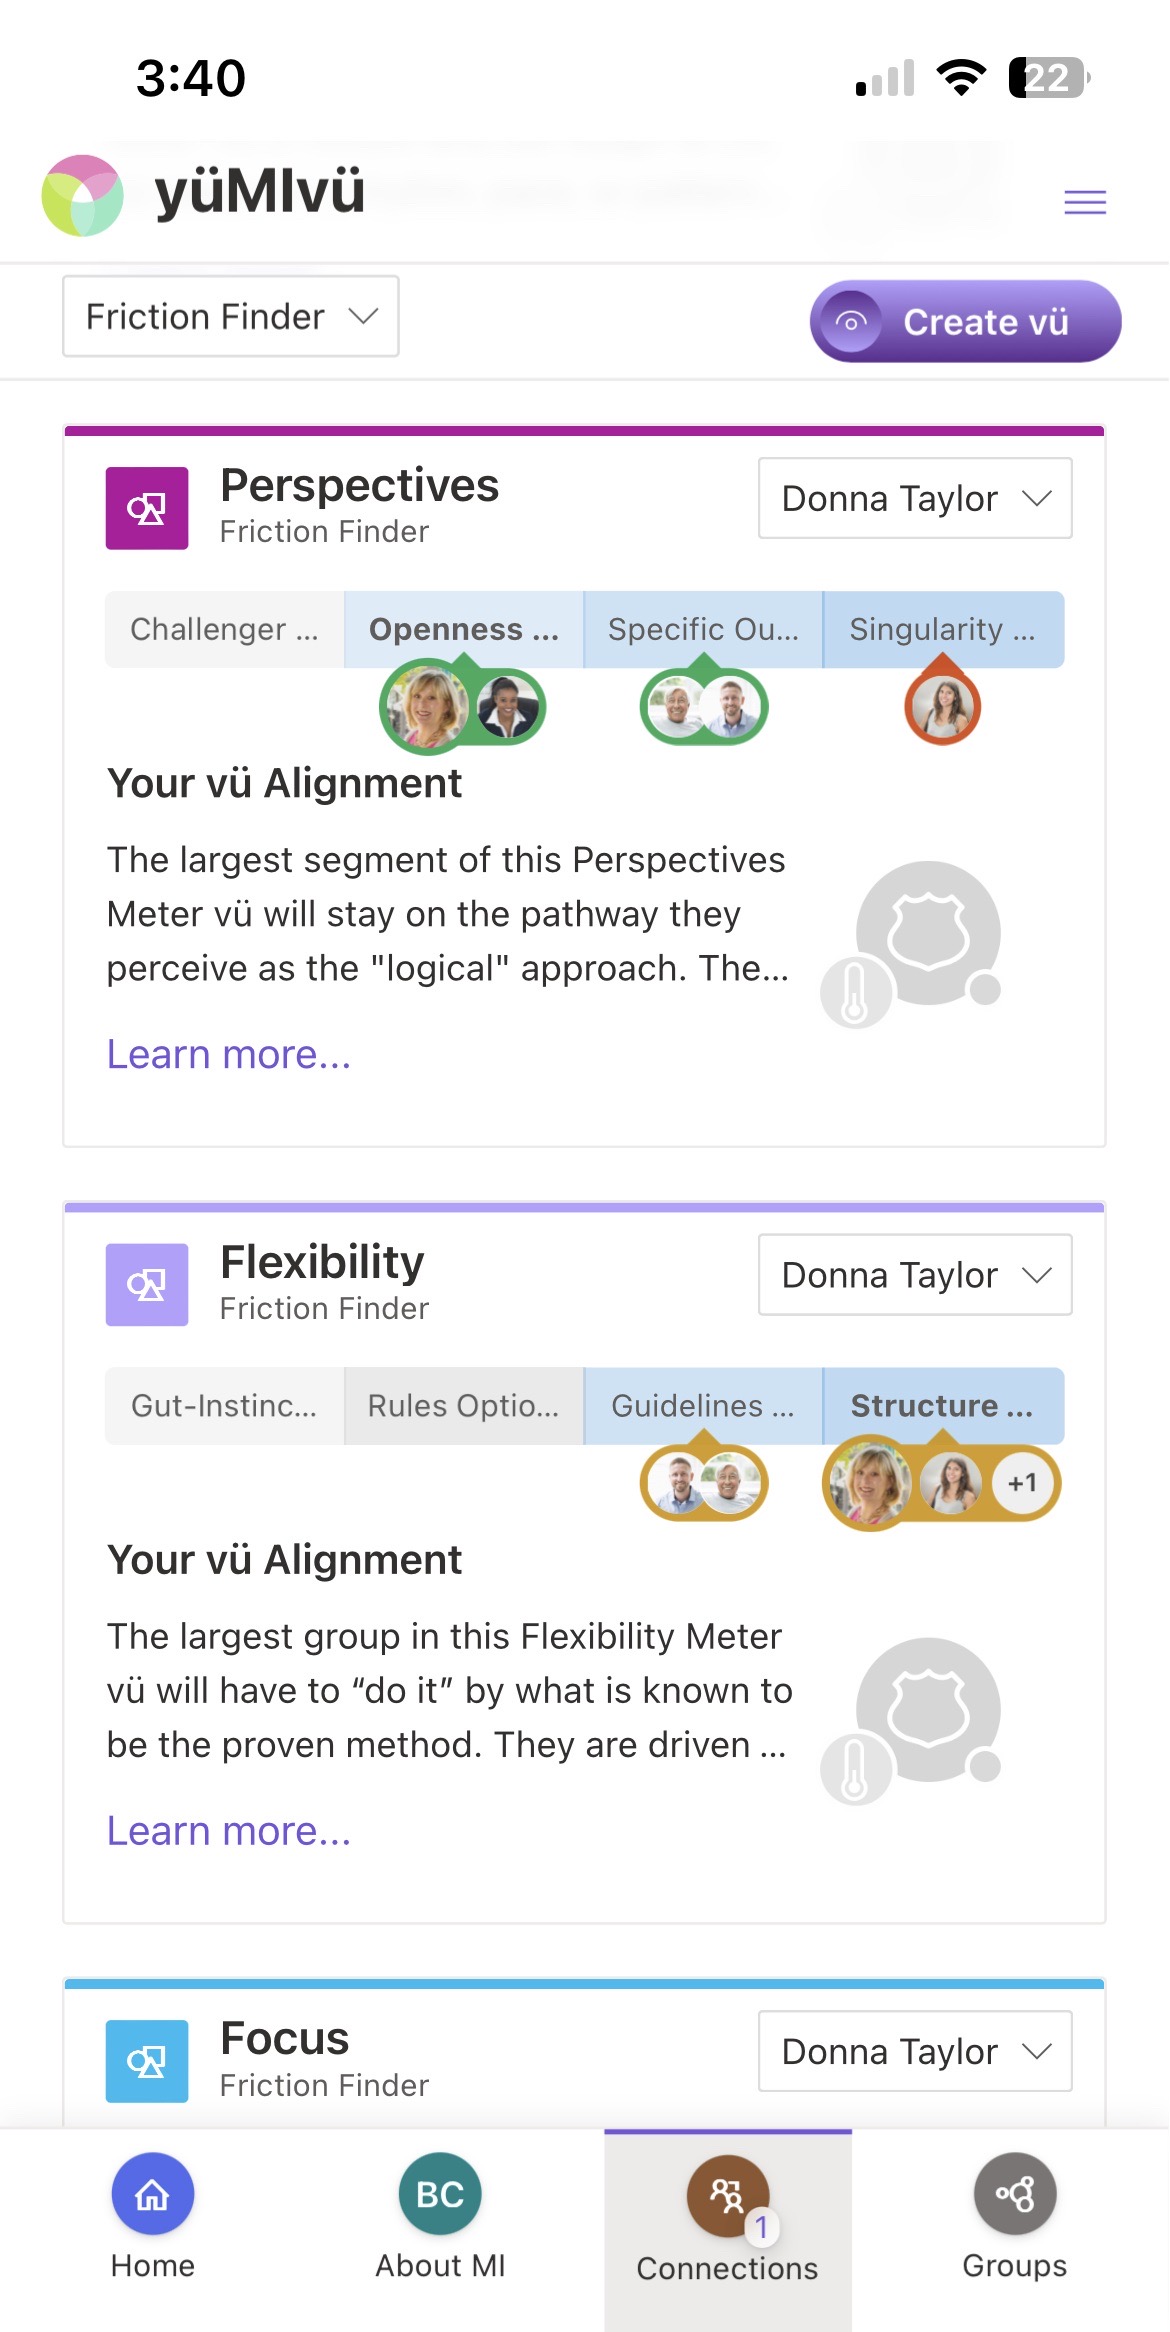 Friction Finder Awareness Alerts helps team members quickly identify where natural friction is likely as each team member works the "way they are wired."  yüMIvü coaches on how to turn potential conflict points into positive engagements.